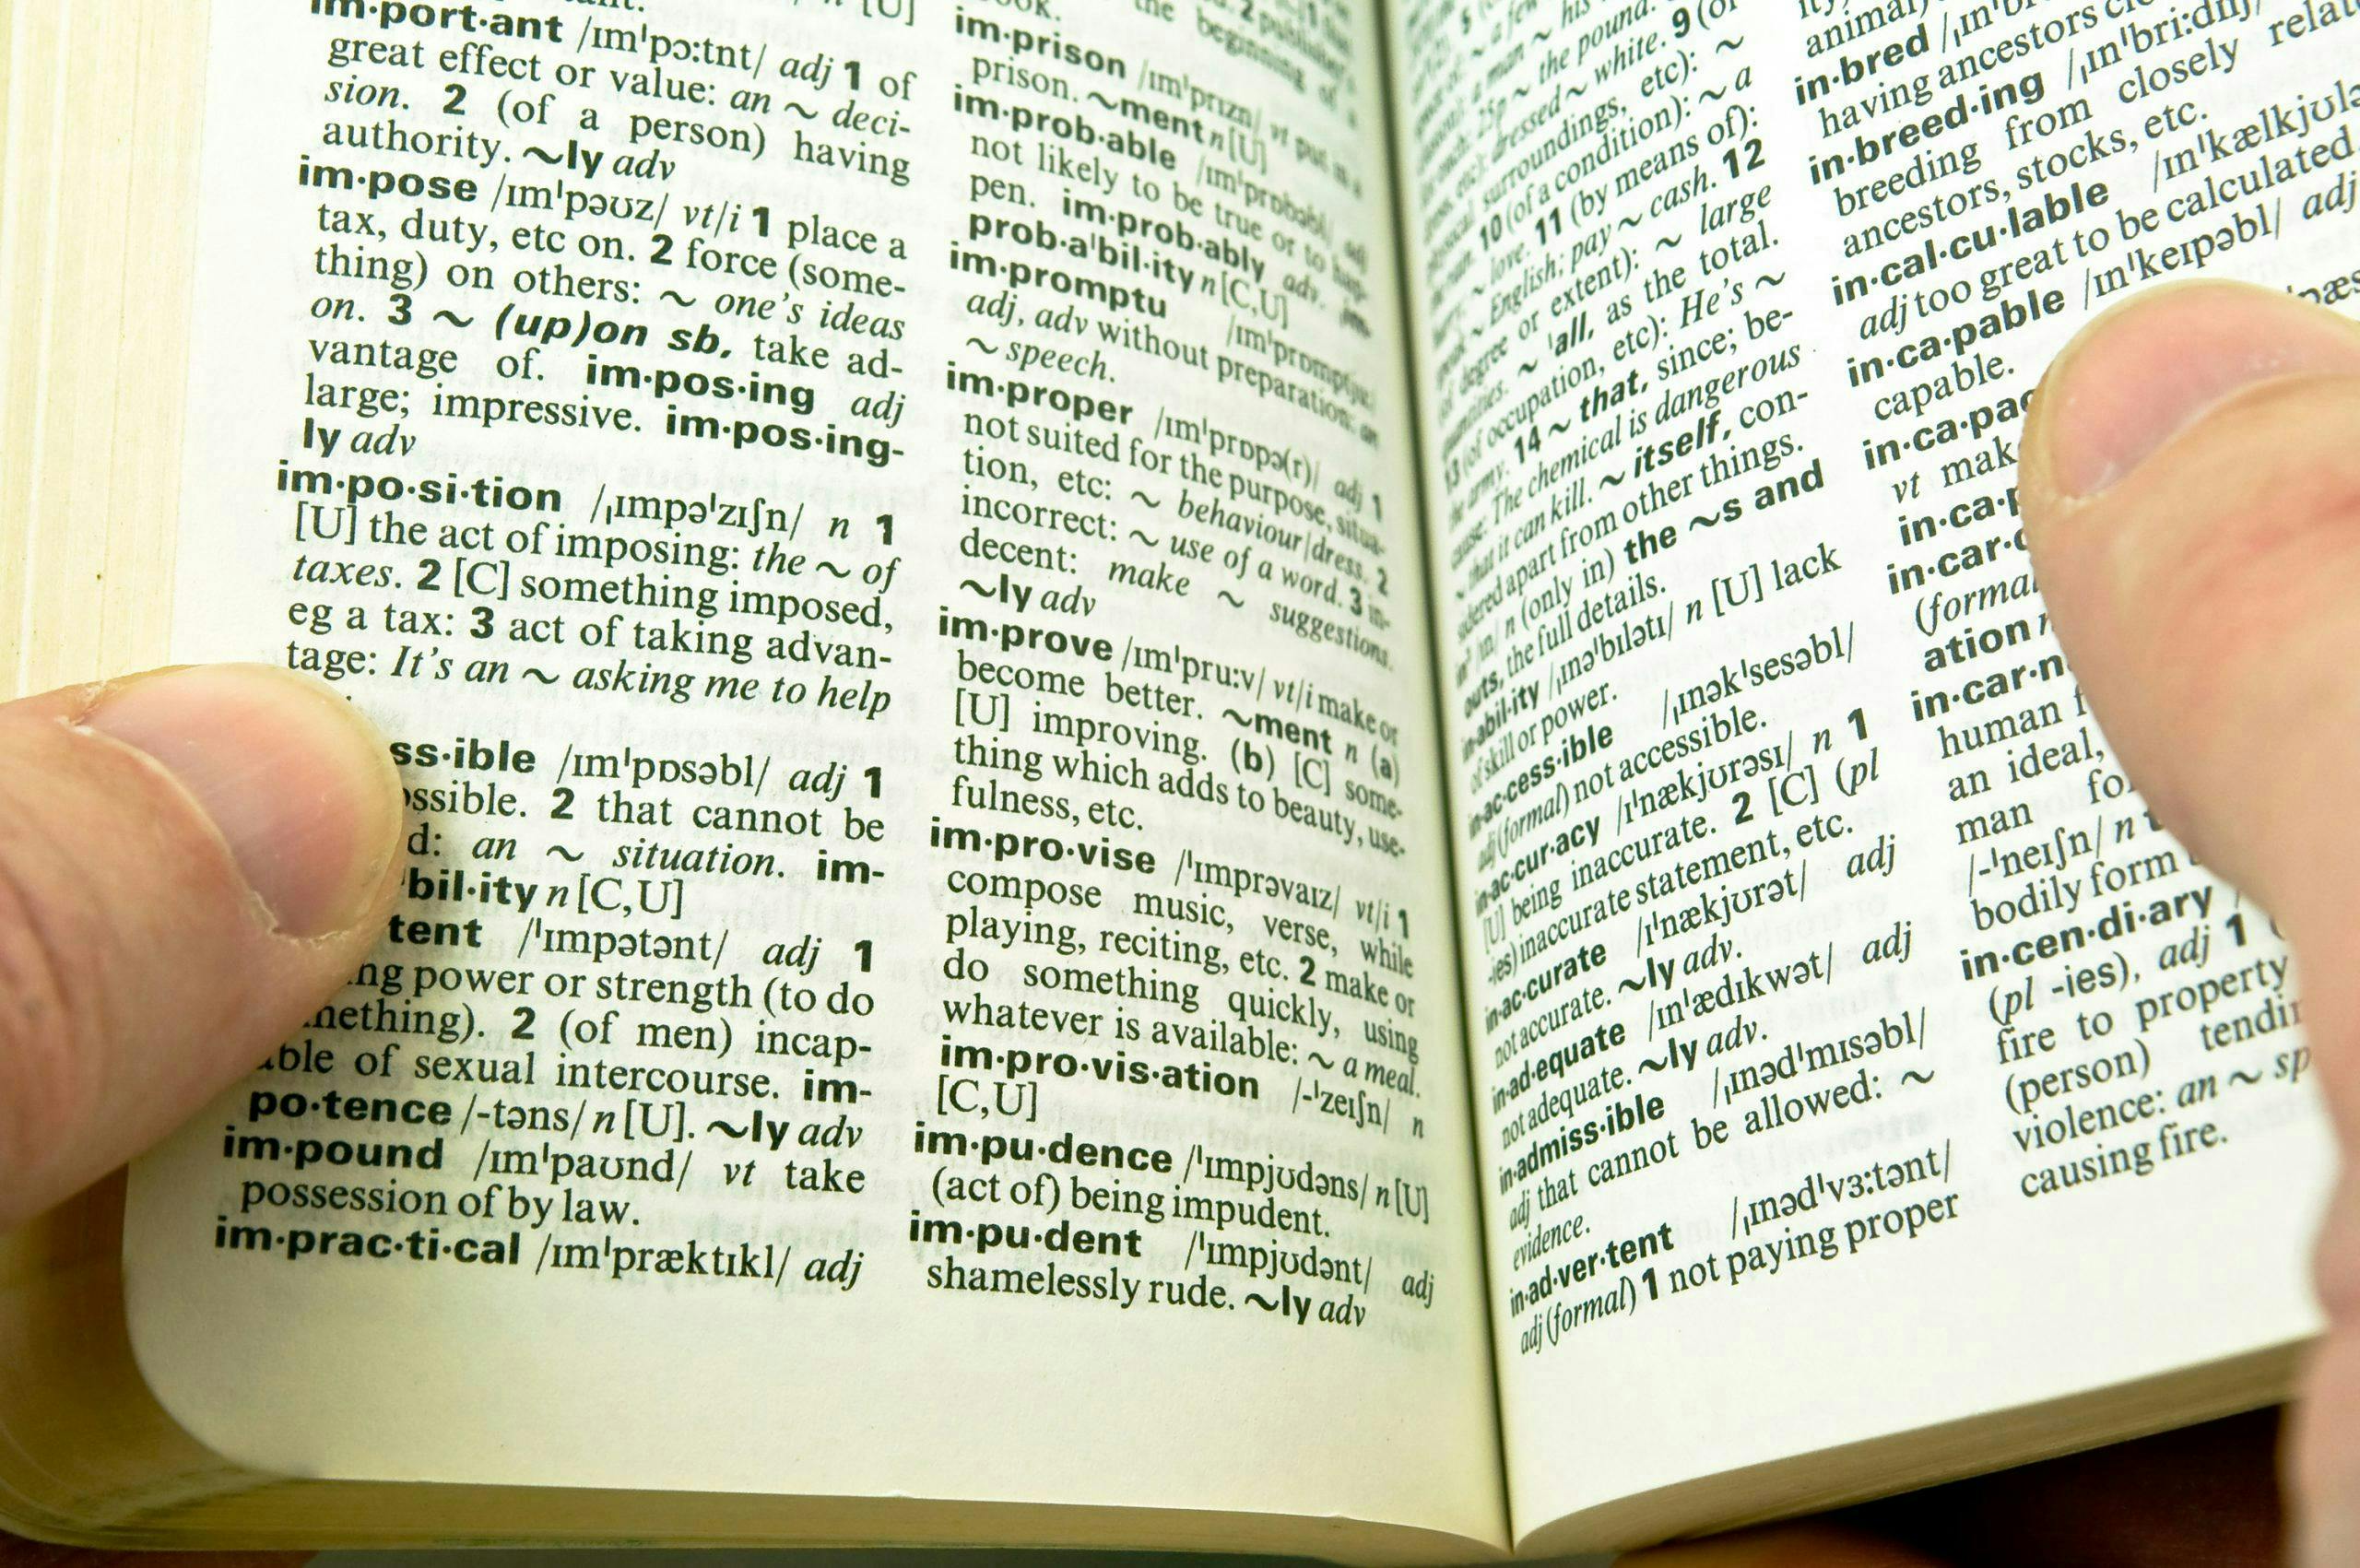 A person holds open a dictionary, revealing definitions of various words on glossy pages, including "impose," "impractical," "imprison," "improve," and "improper."